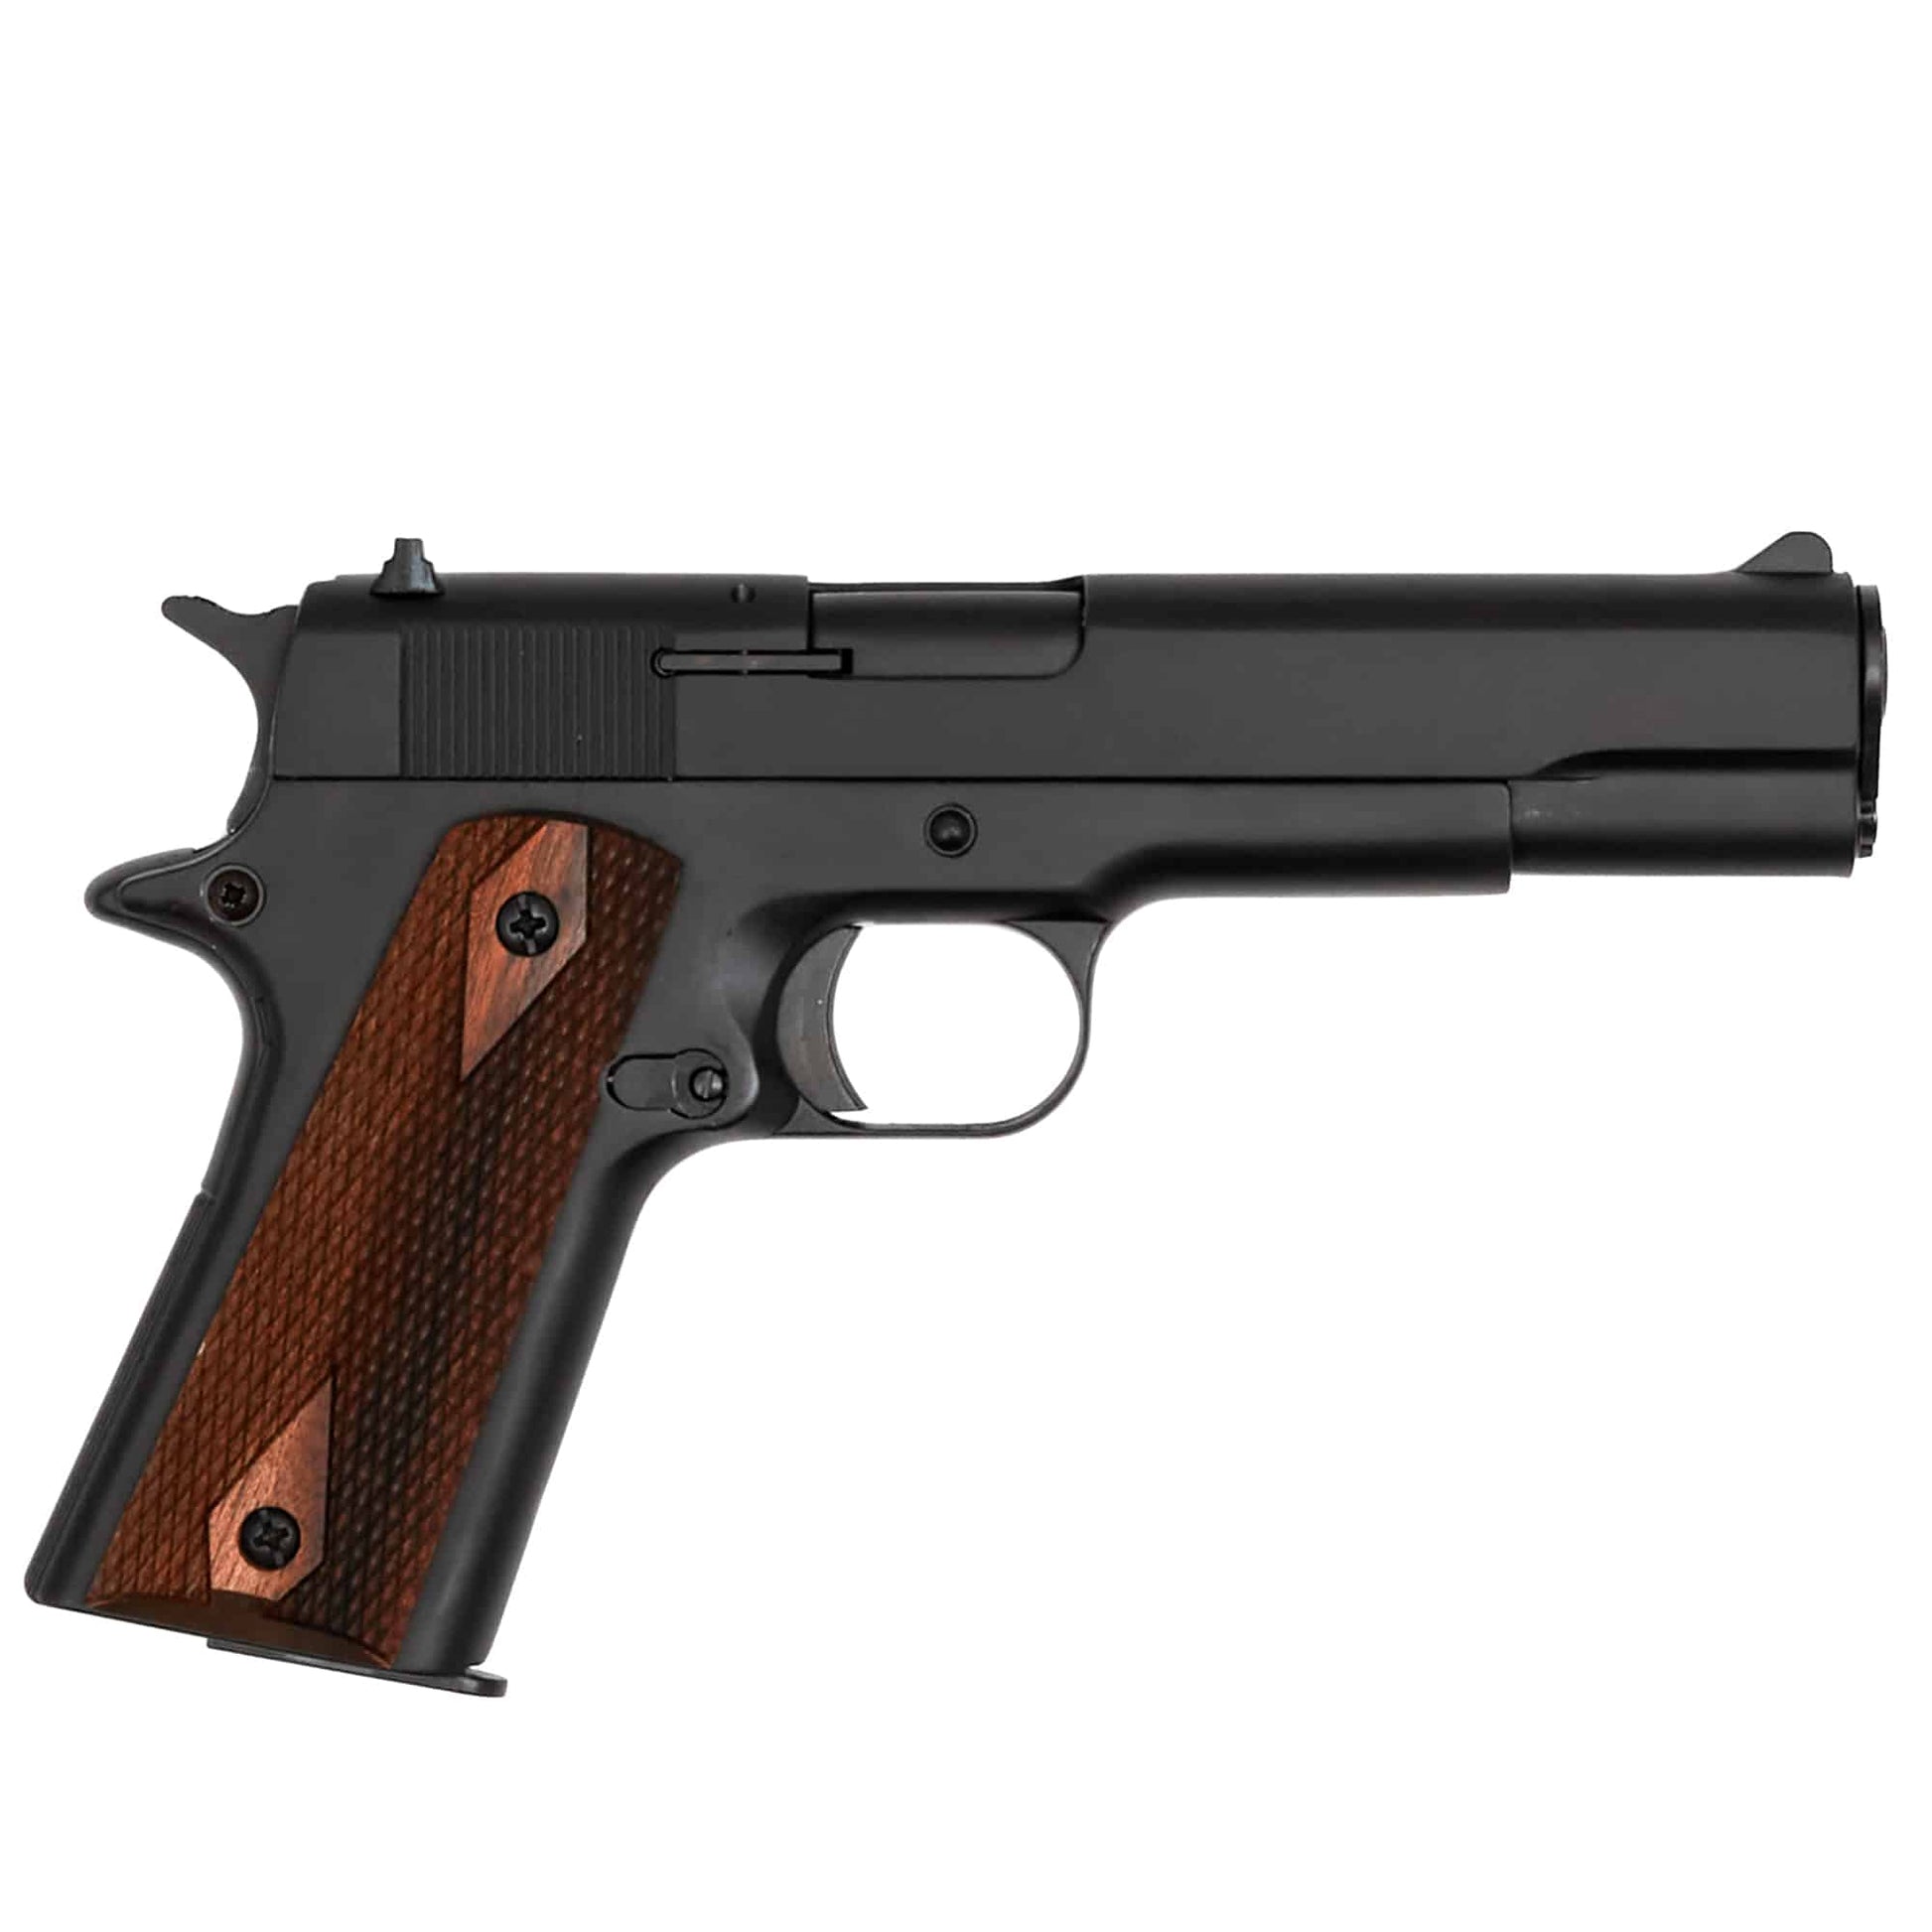 M1911 .45 Military Pistol with Standard Grips